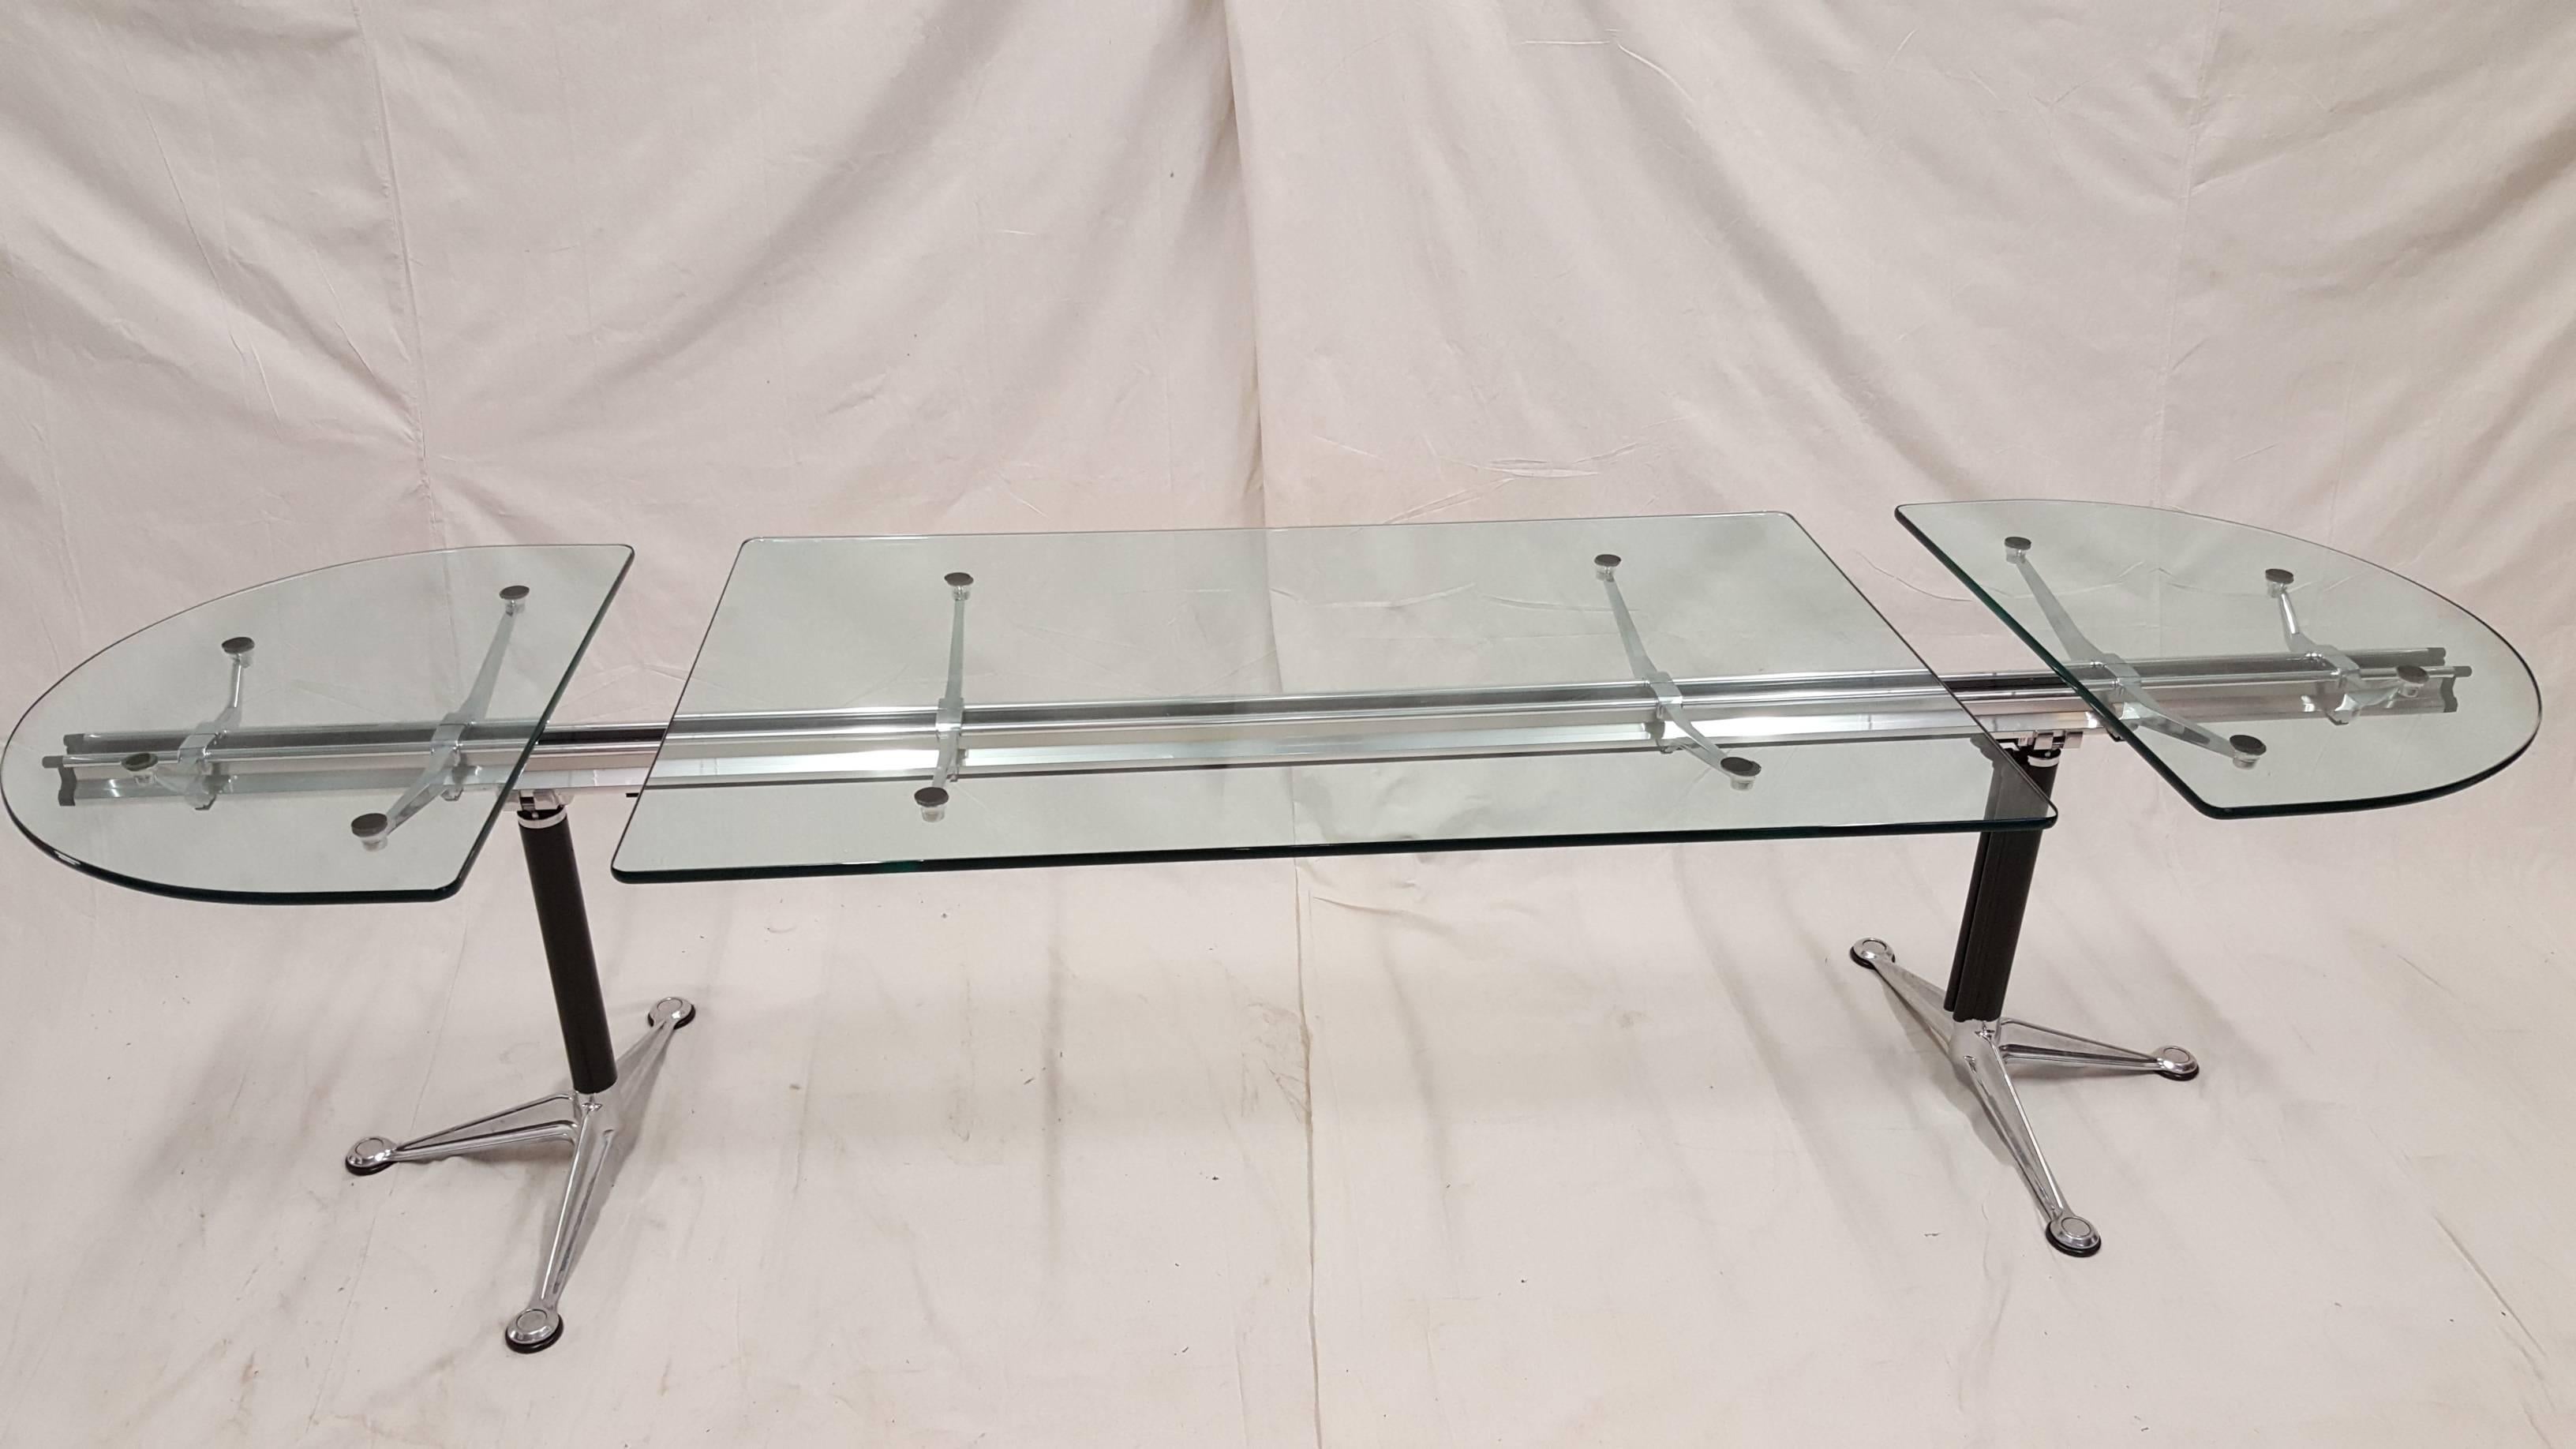 Table desk by bruce burdick for herman miller, can be use as table or desk, its a fully functioning table systems its a example of how beautiful sculpture aluminum and glass look when combined.